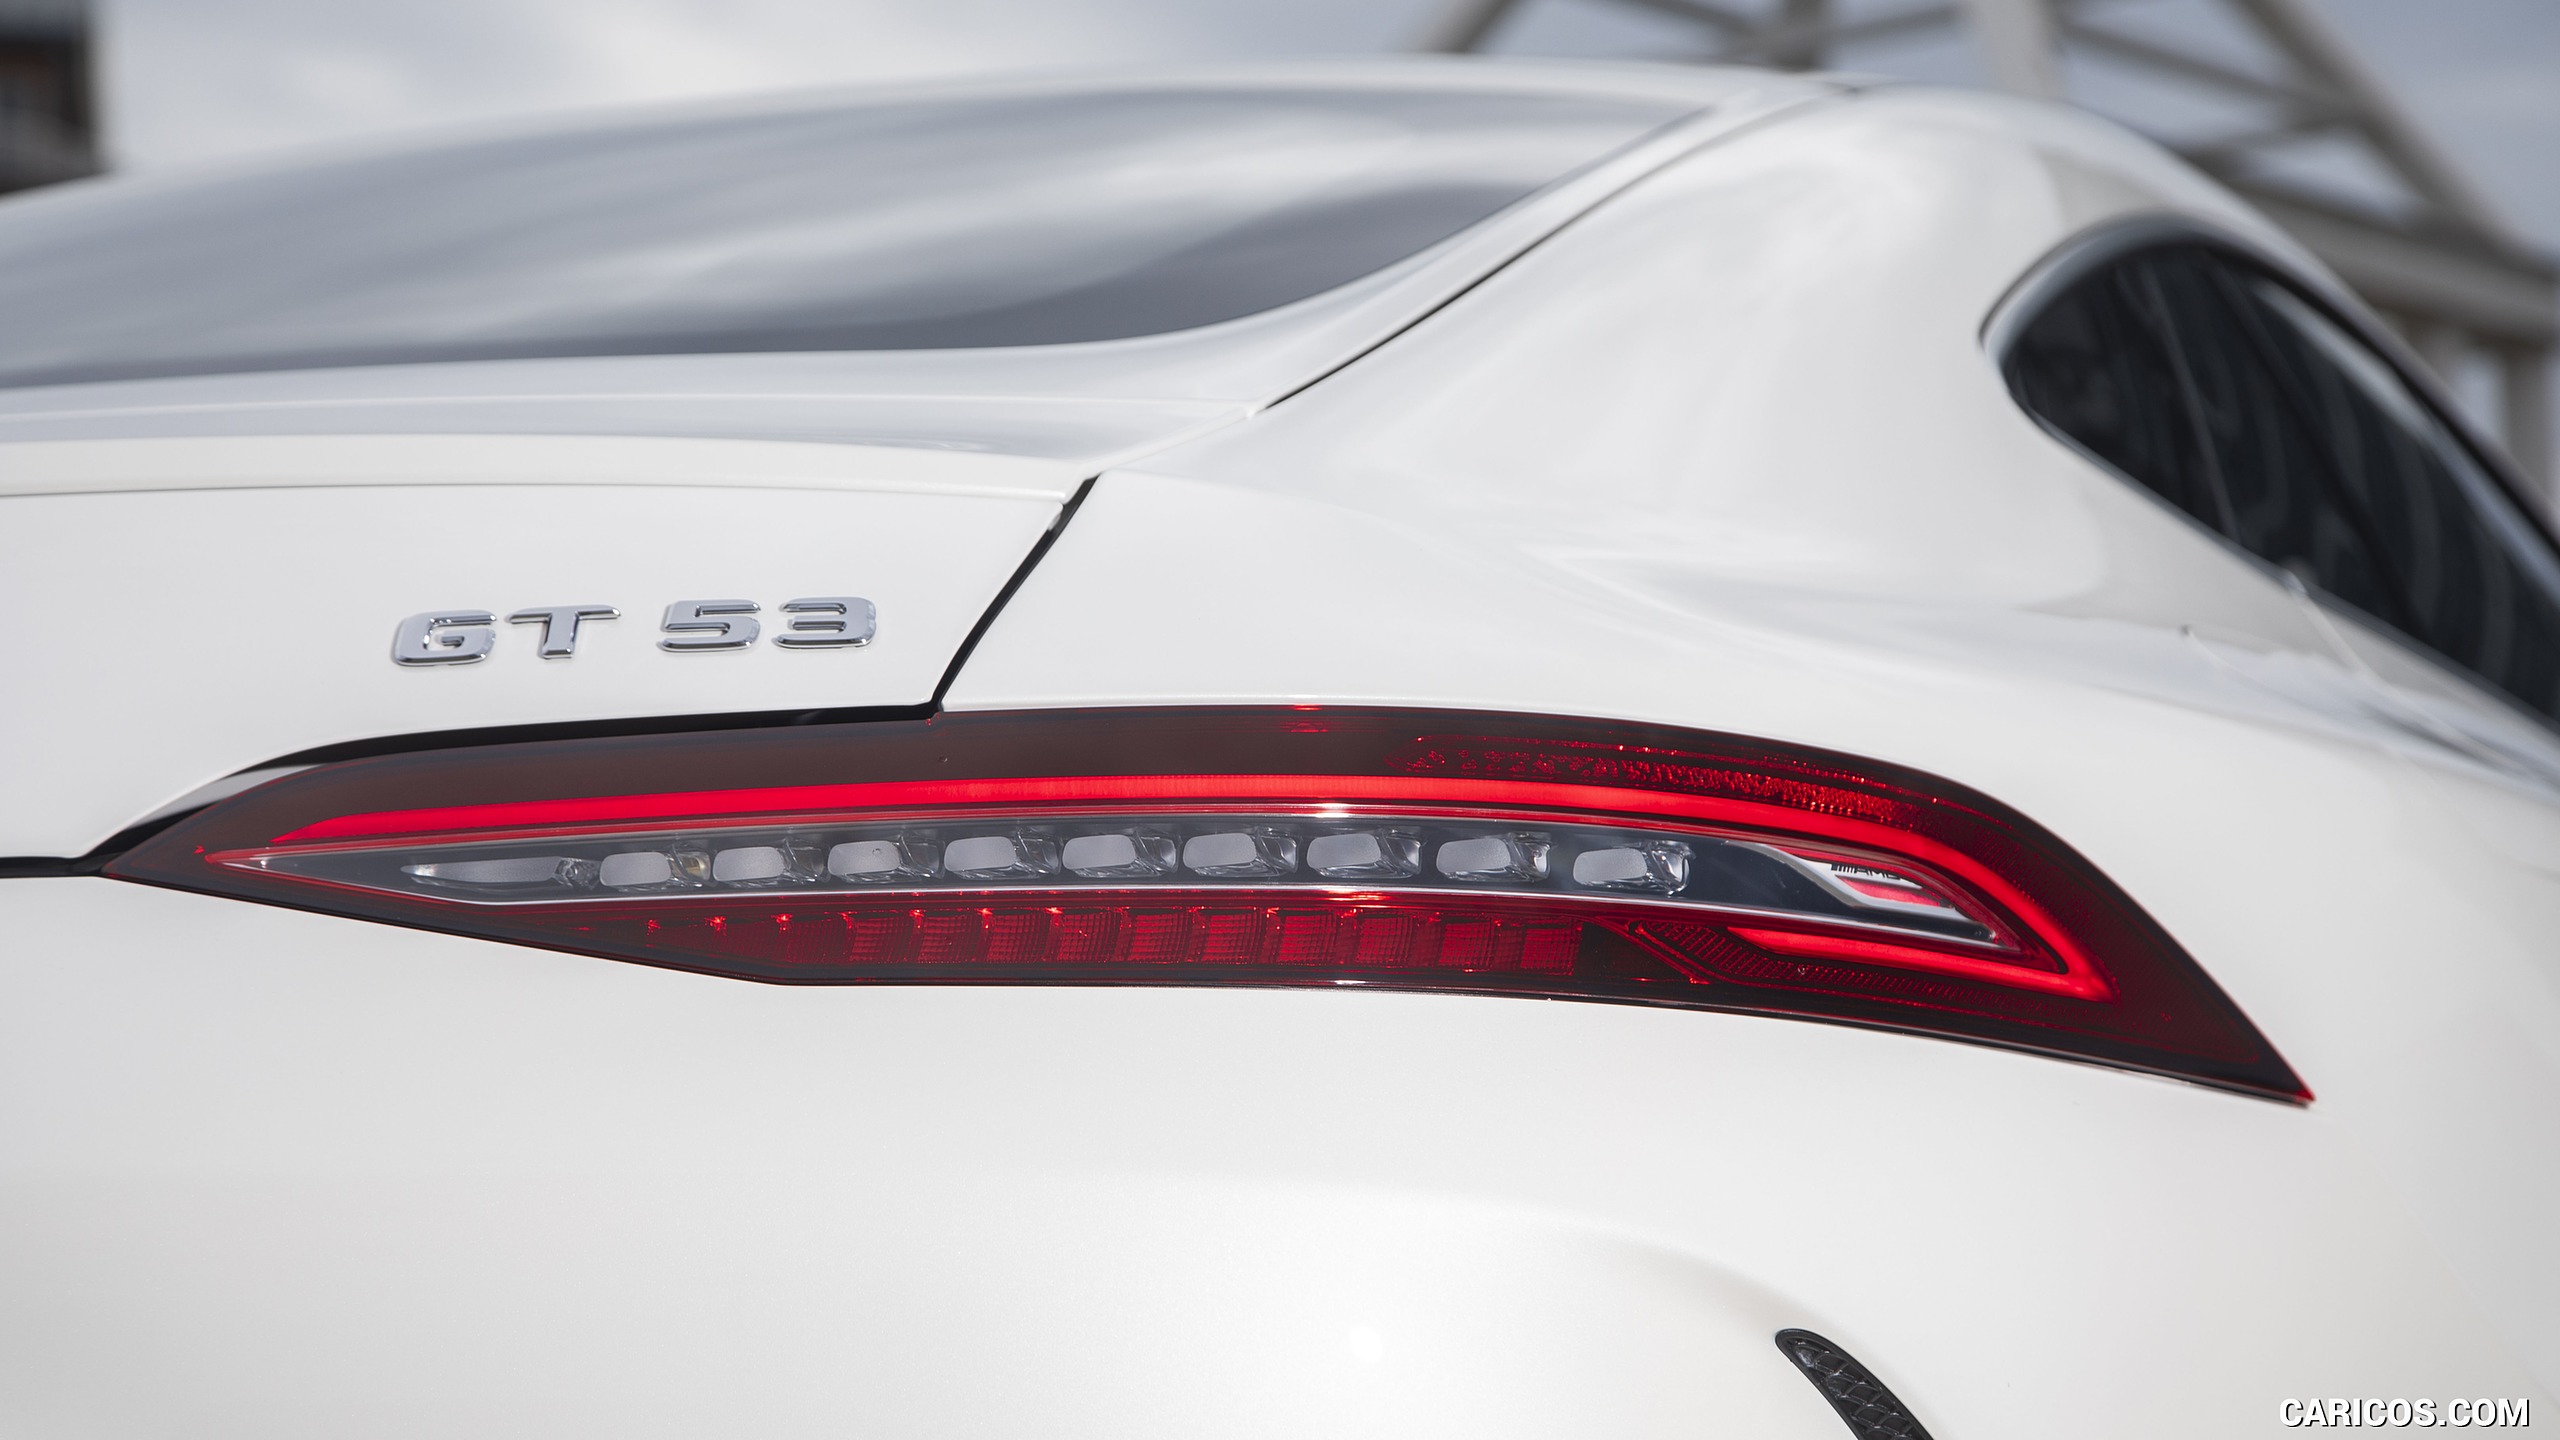 2019 Mercedes-AMG GT 53 4-Door Coupe (US-Spec) - Tail Light, #343 of 427